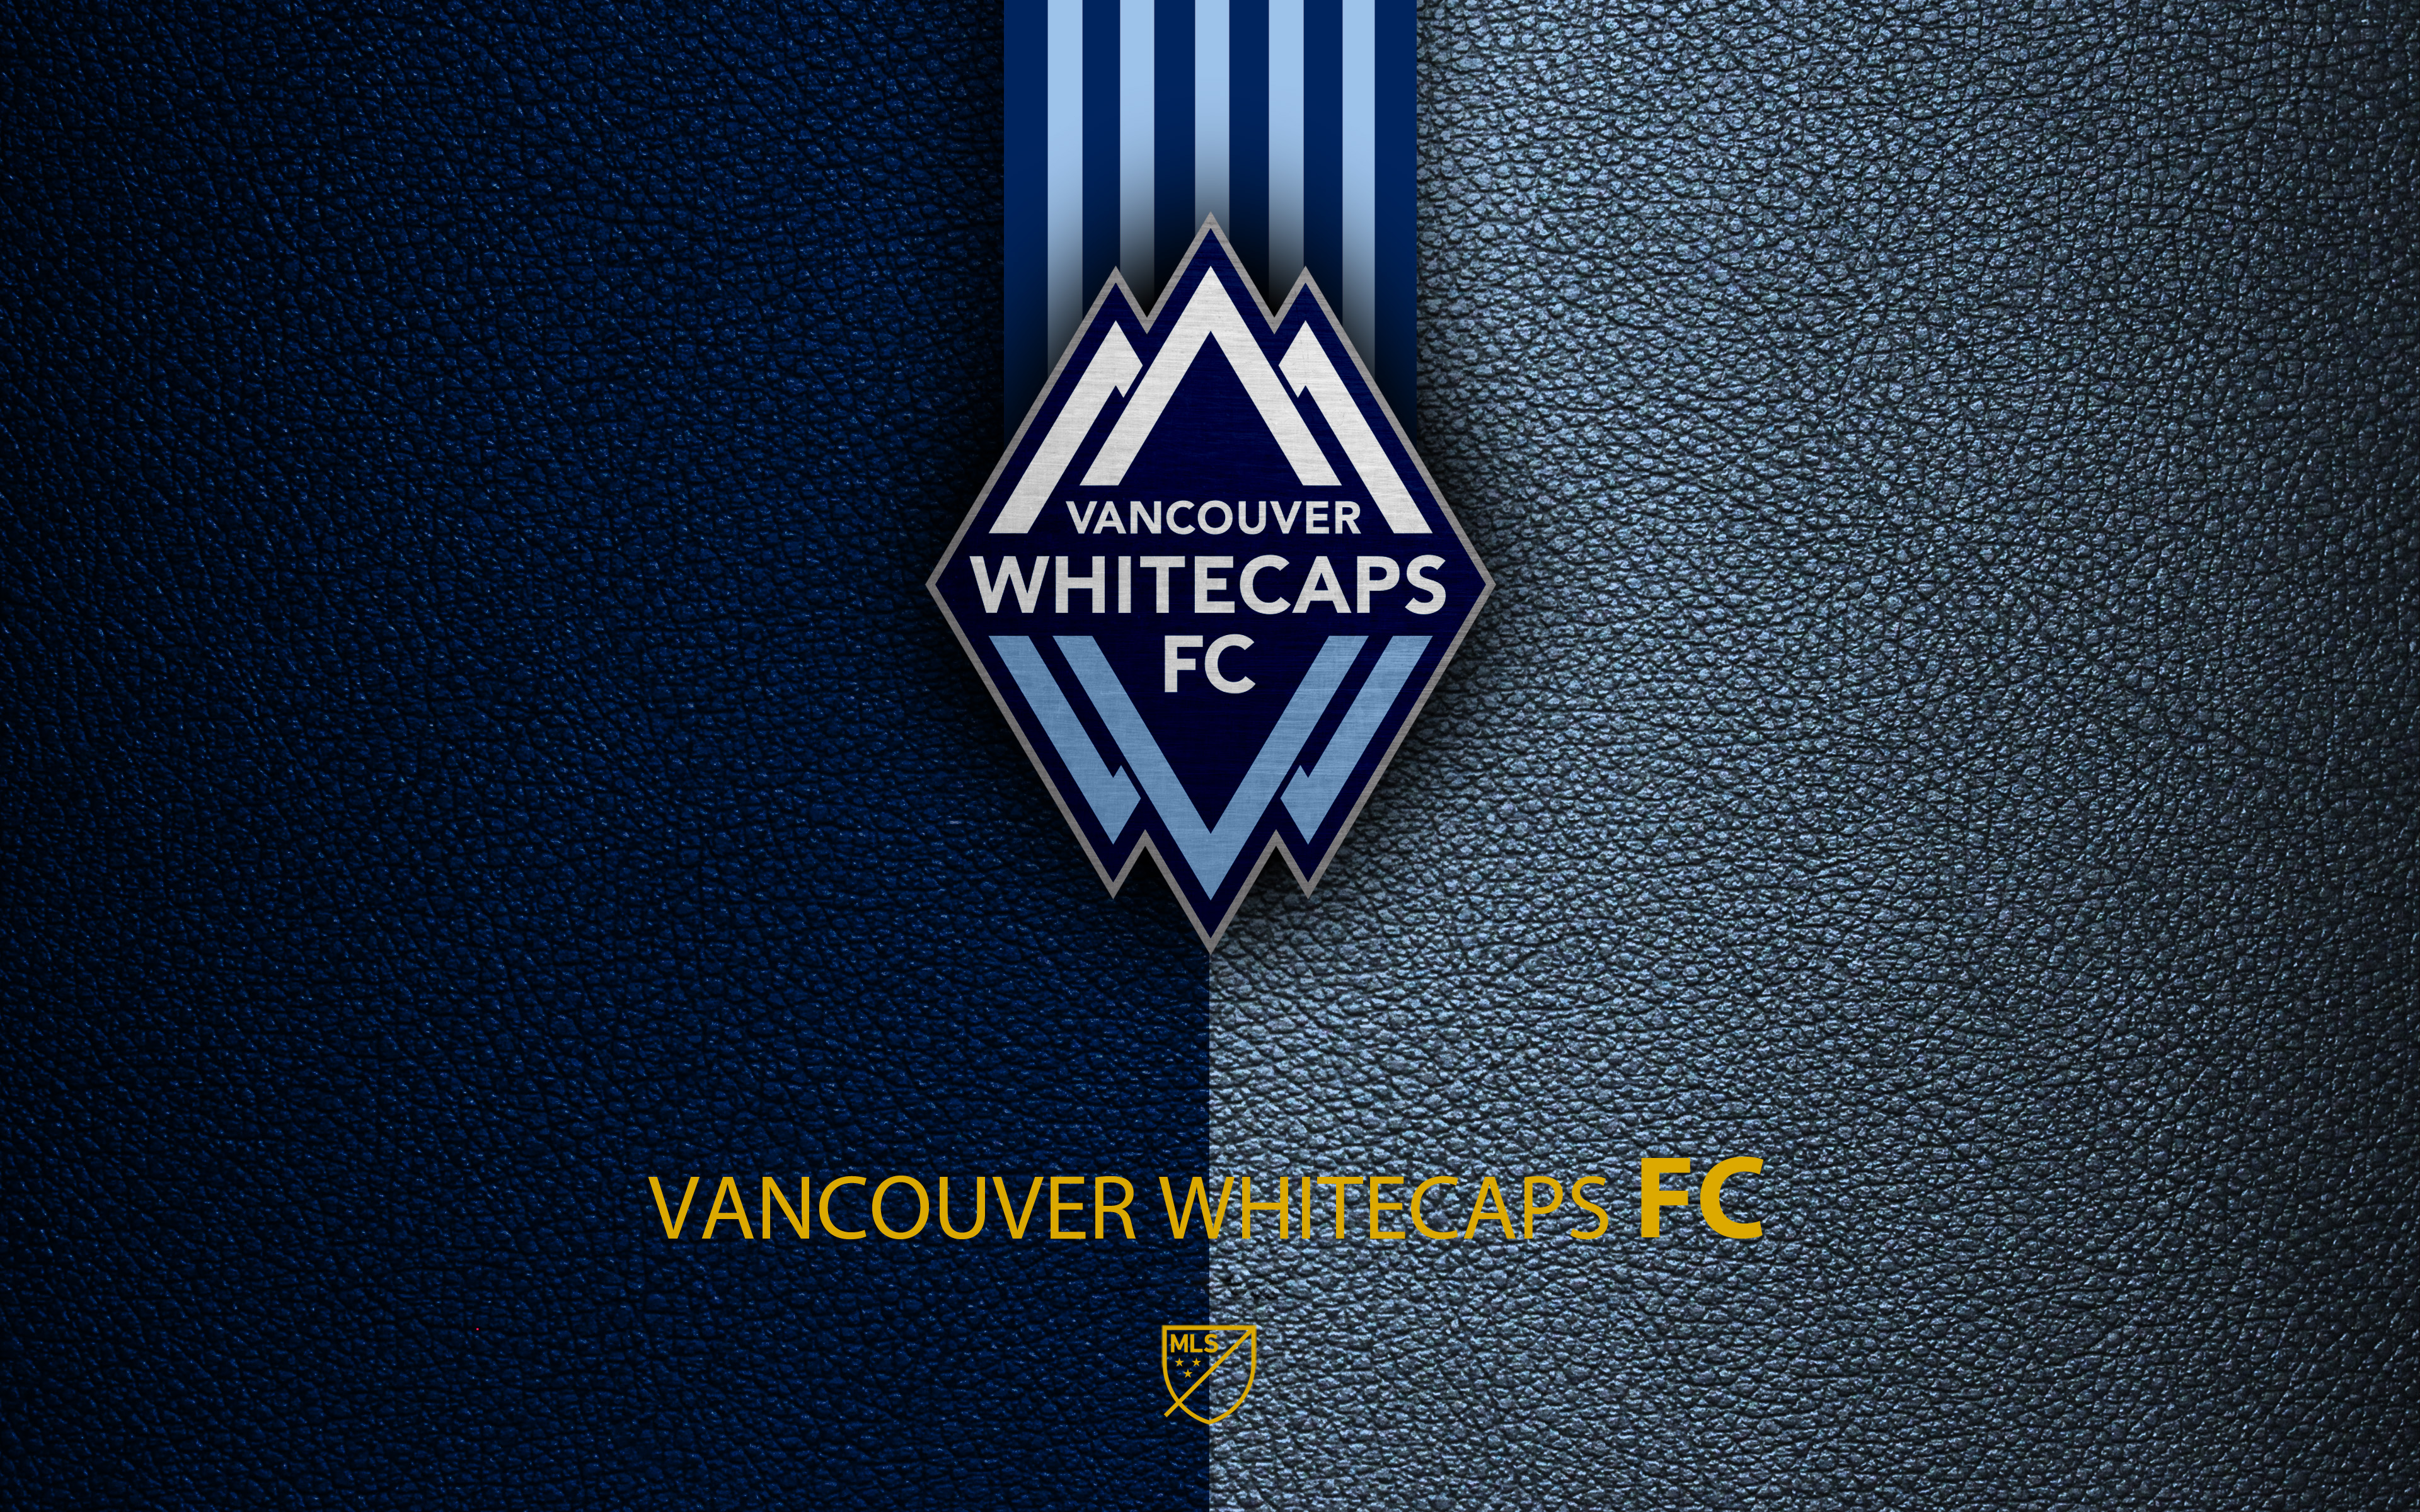 Popular Vancouver Whitecaps Fc Image for Phone